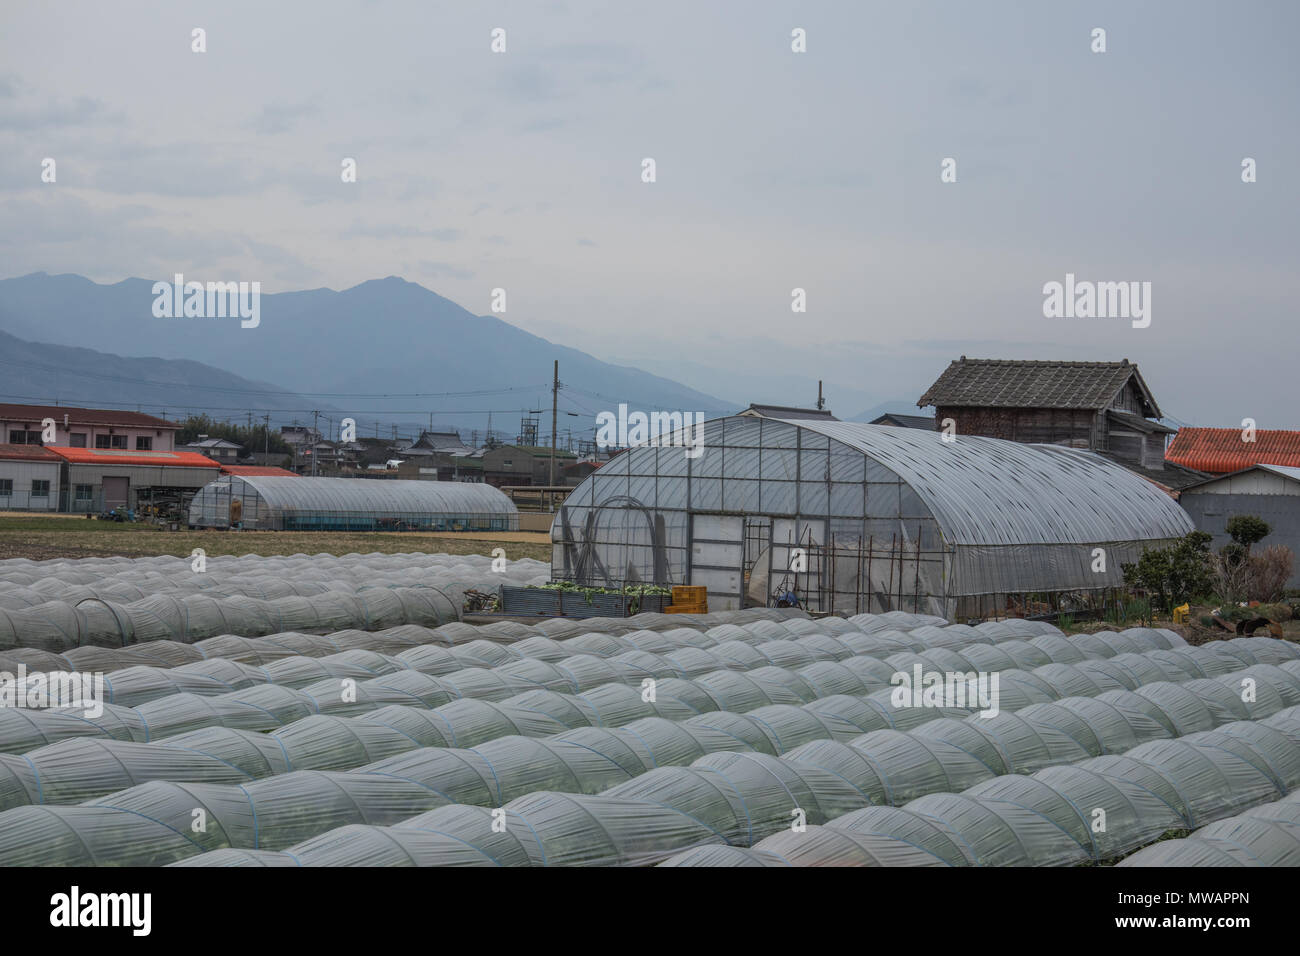 Japanese horticulture, contemporary agriculture, a typical  rural  landscape. Factory farming with plastic tunnel houses, Tokushima, Shikoku, Japan Stock Photo